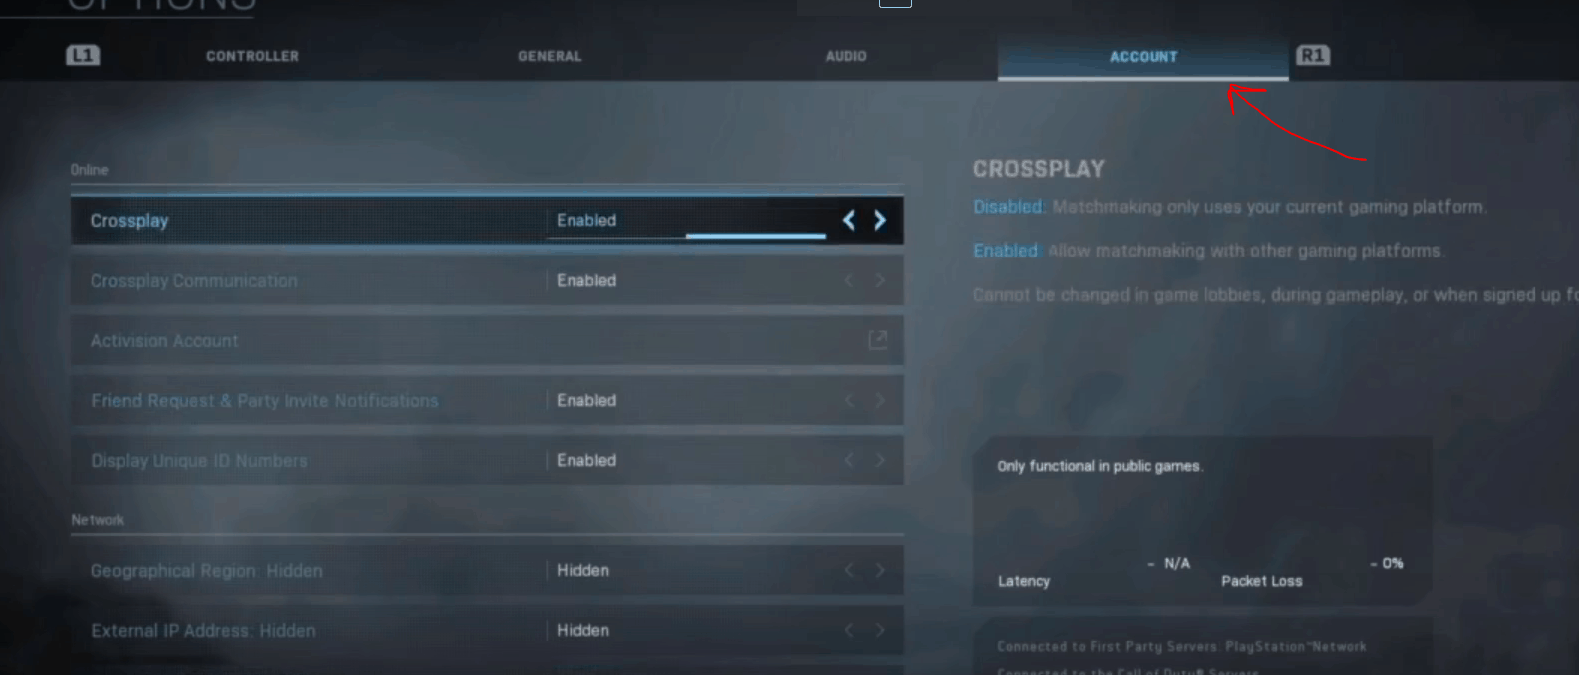 How To Enable Crossplay In Call Of Duty Warzone